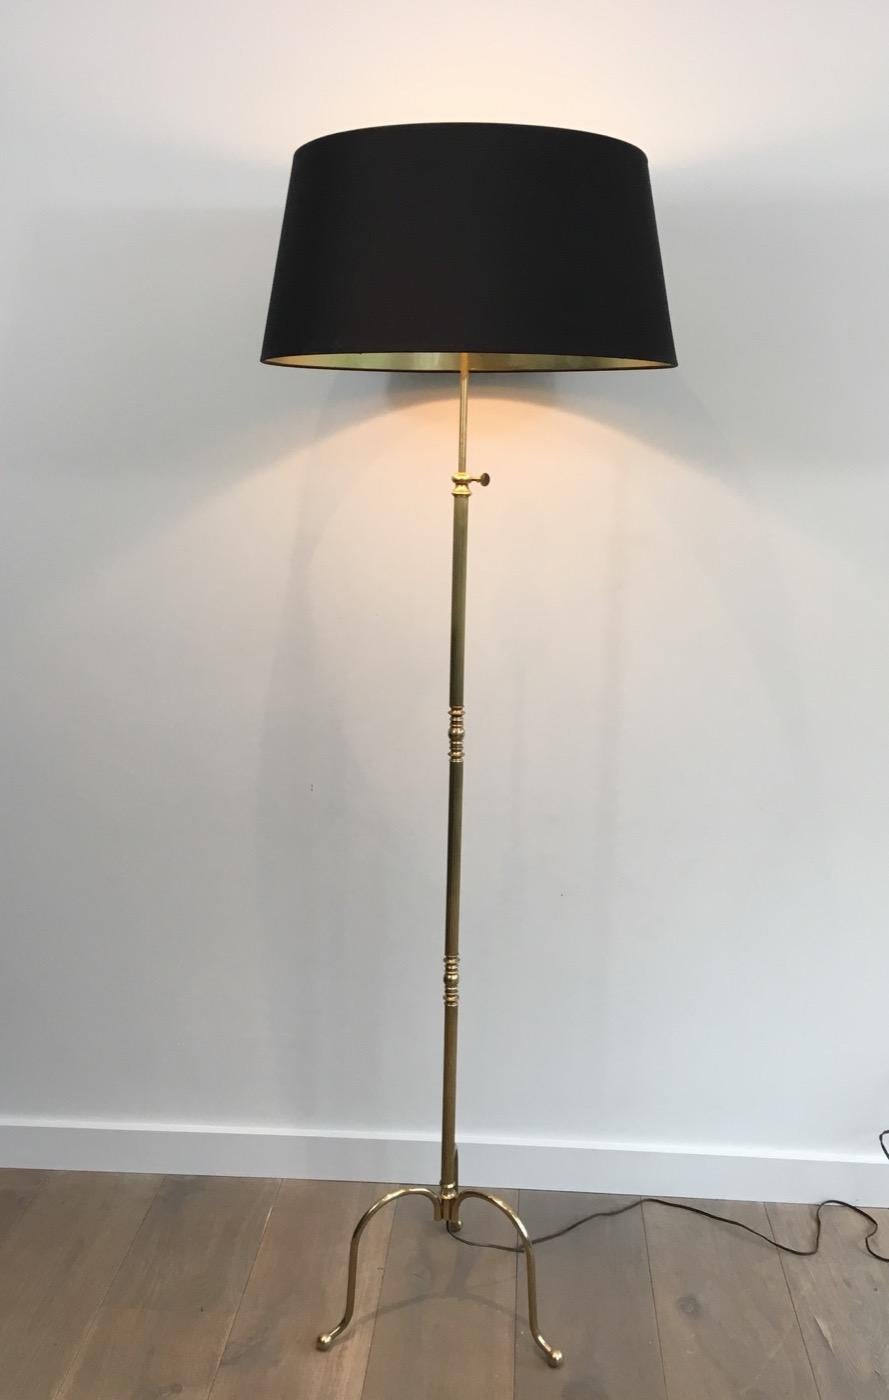 Neoclassical Adjustable Brass Floor Lamp with Black Shade Gold Inside, French 2